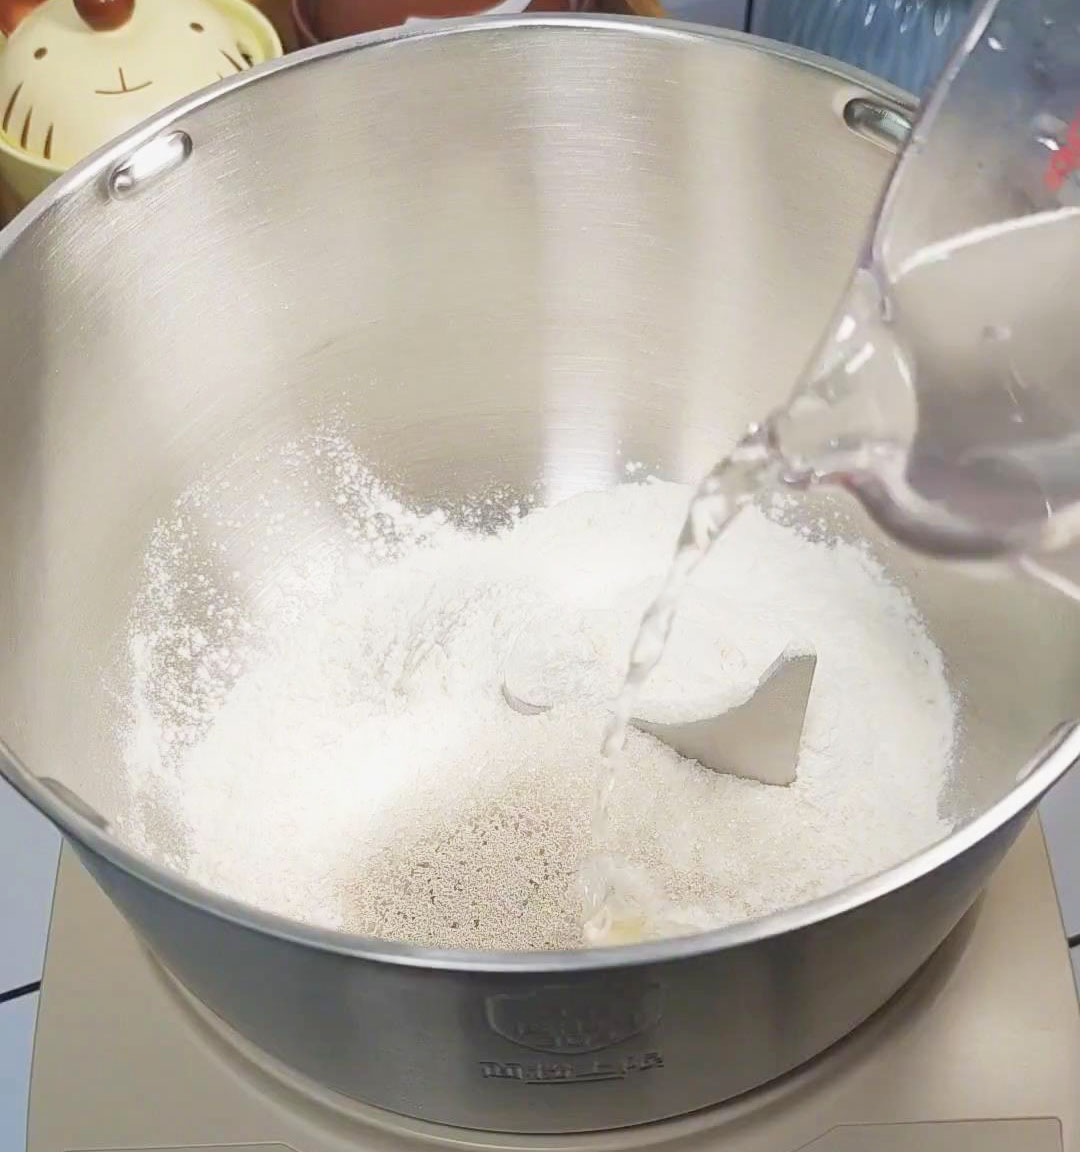 In a bowl or kneading machine, add flour, white sugar, yeast, and warm water